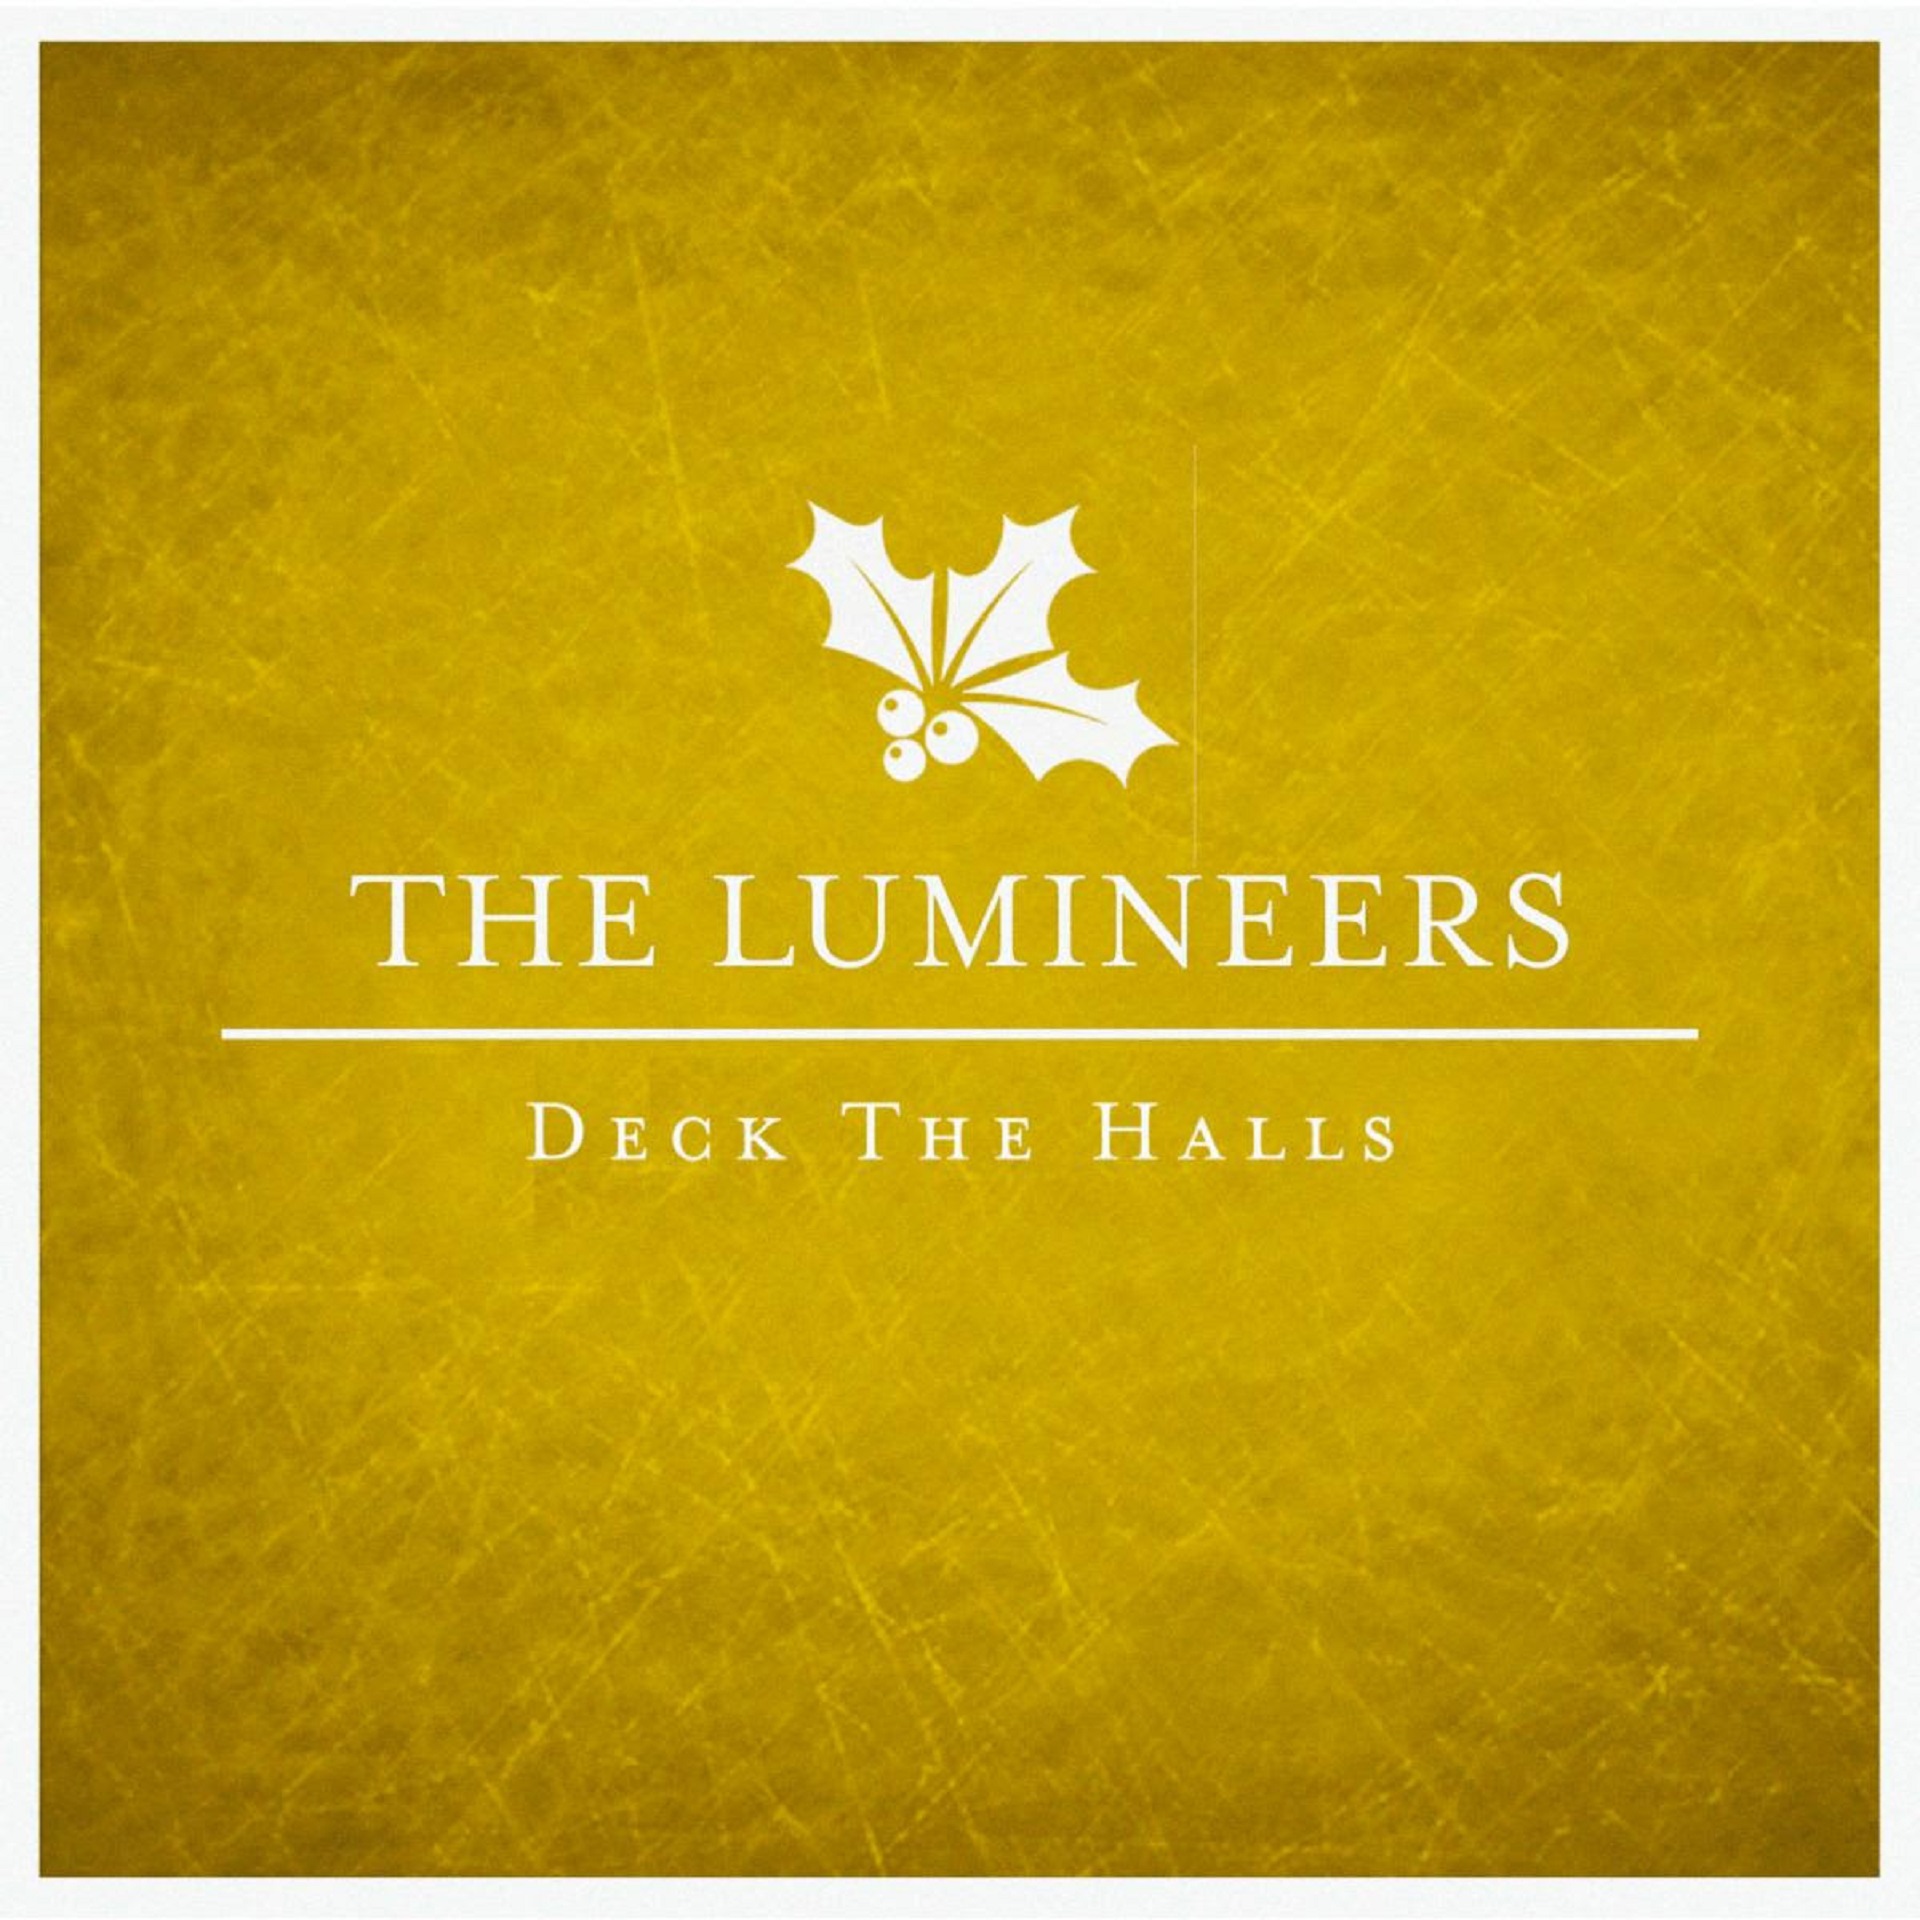 The Lumineers "Deck the Halls" - WATCH THEIR BITTERSWEET TAKE ON THE HOLIDAY CLASSIC